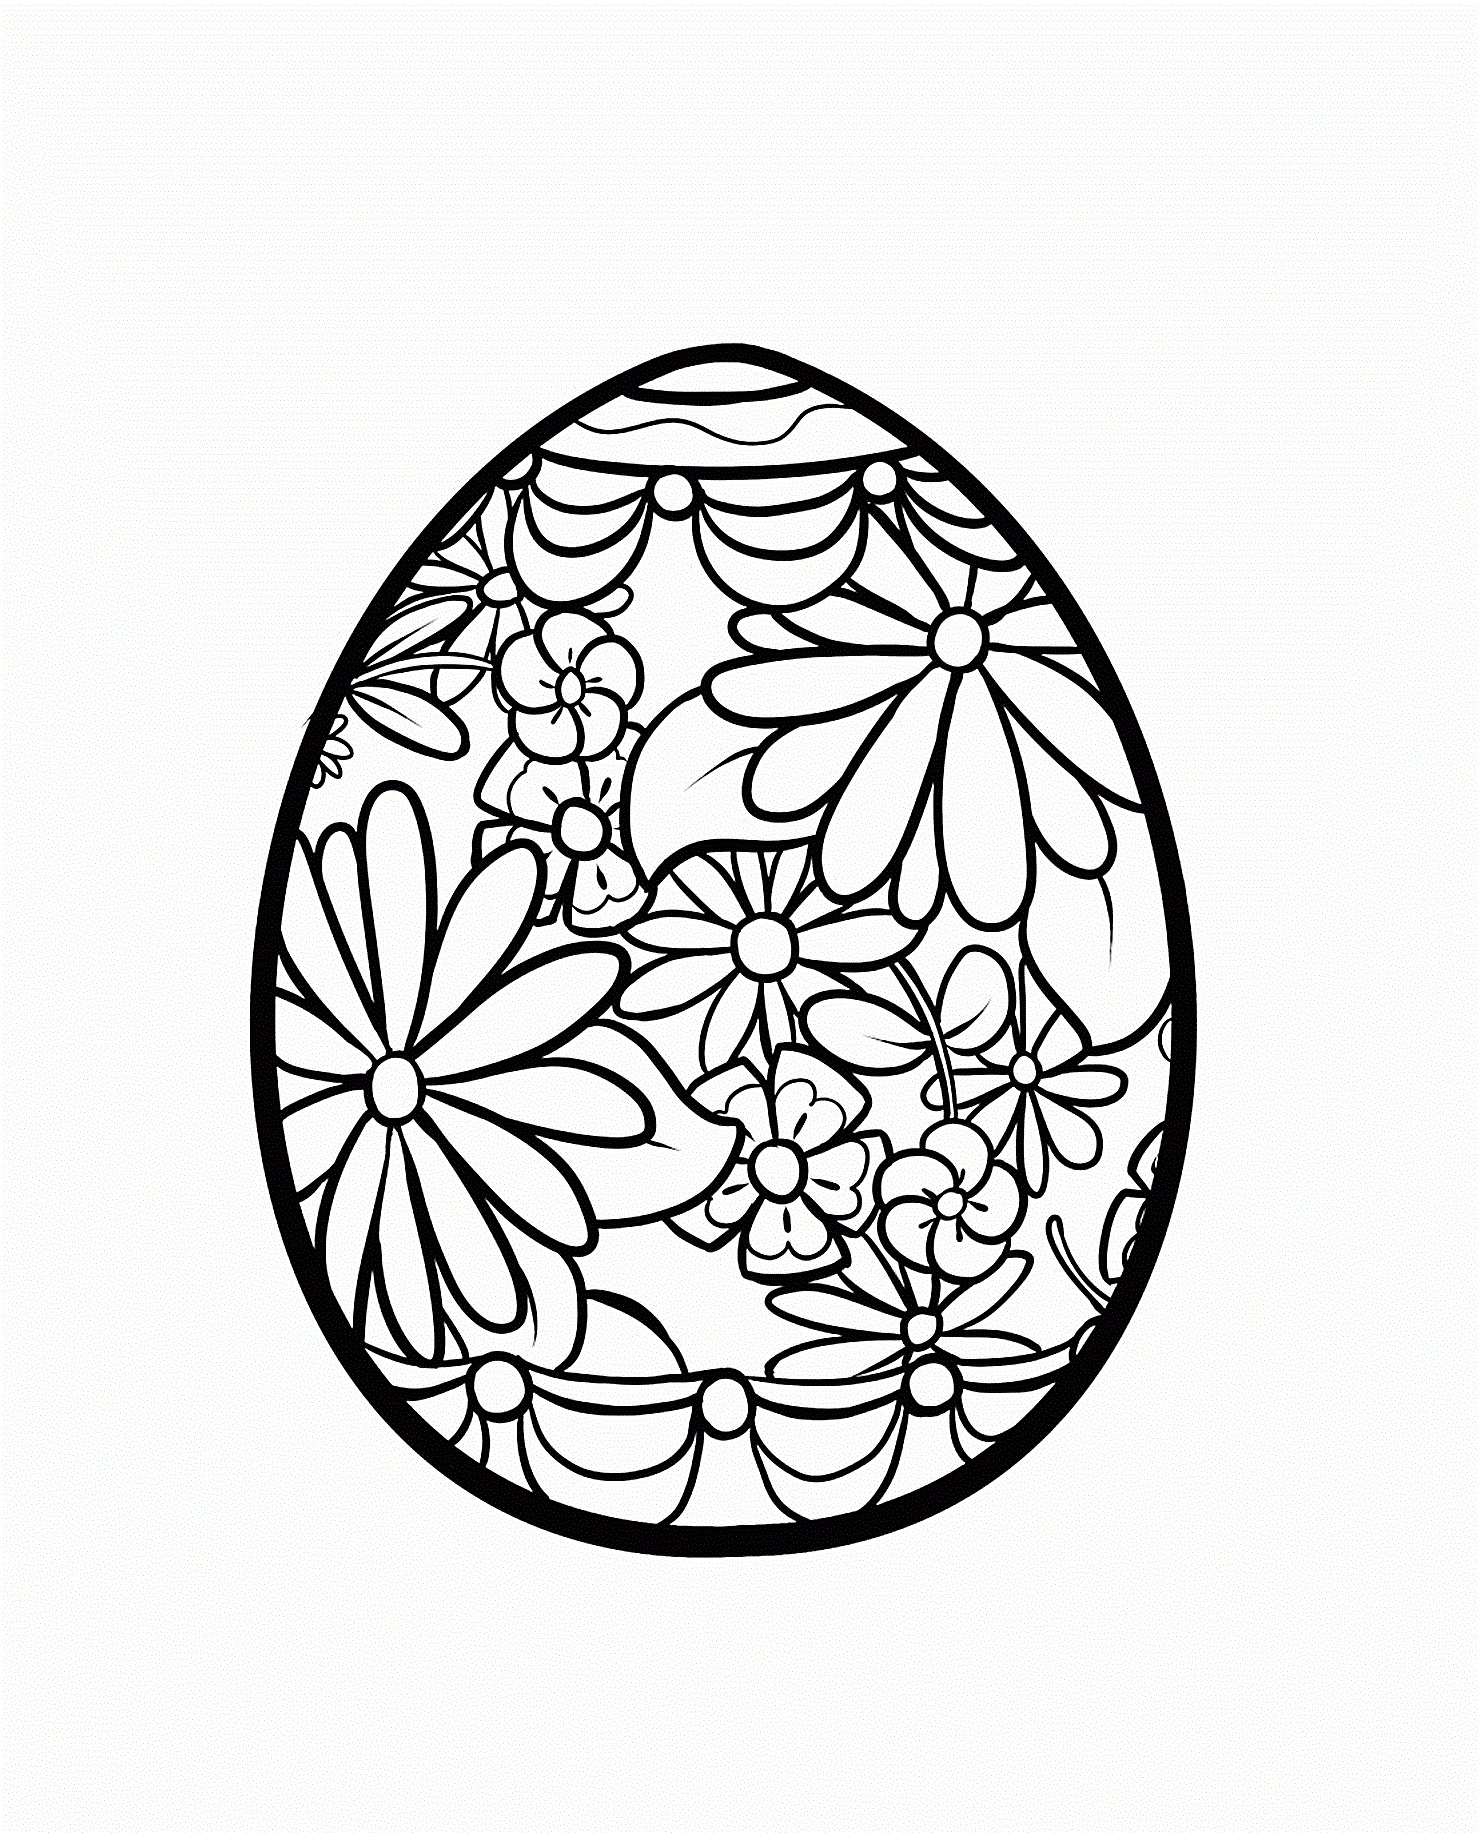 15 Printable Easter Coloring Pages - Holiday Vault